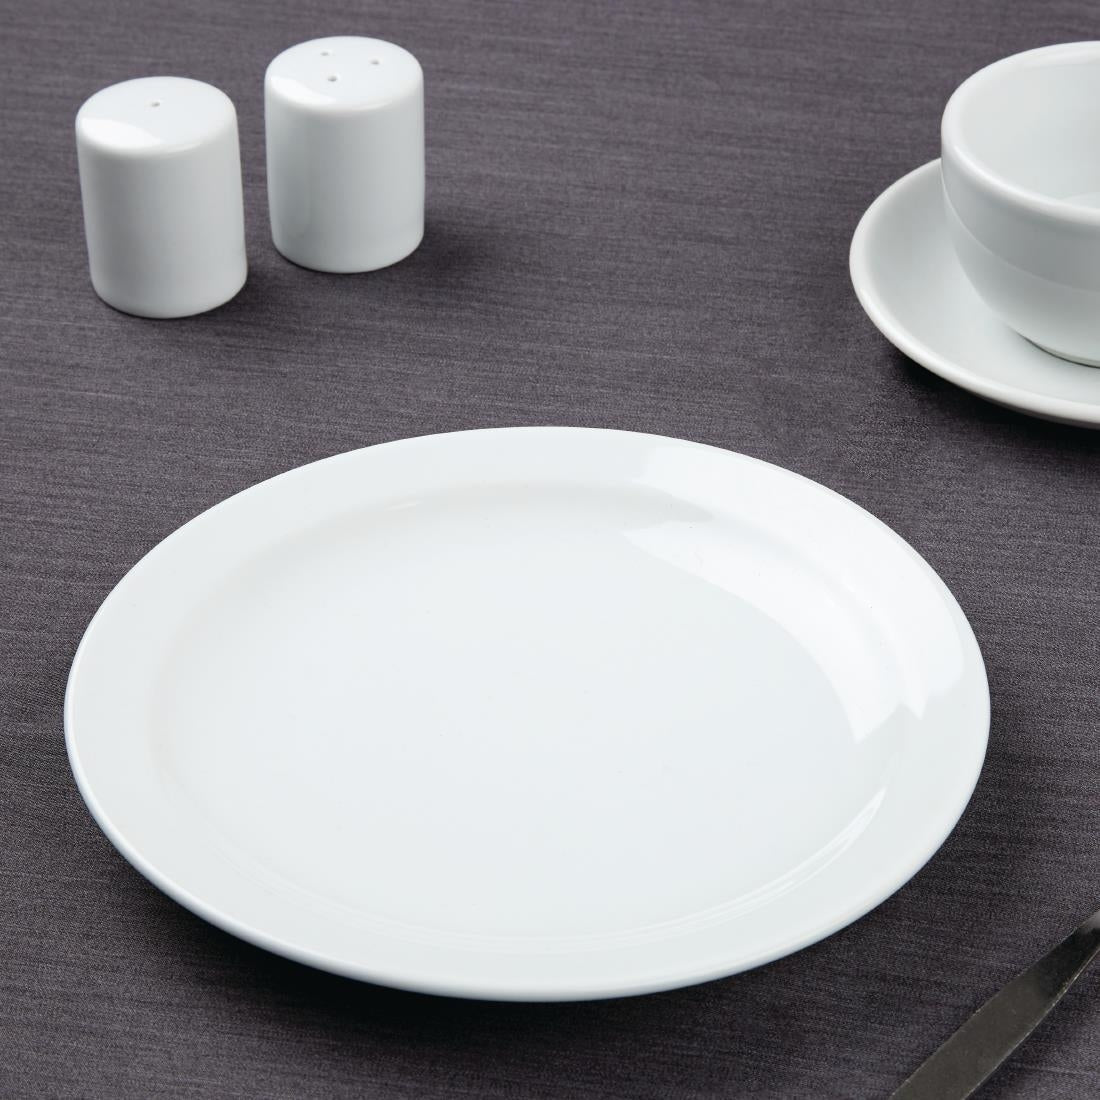 Athena Hotelware Narrow Rimmed Plates 205mm (Pack of 12) JD Catering Equipment Solutions Ltd